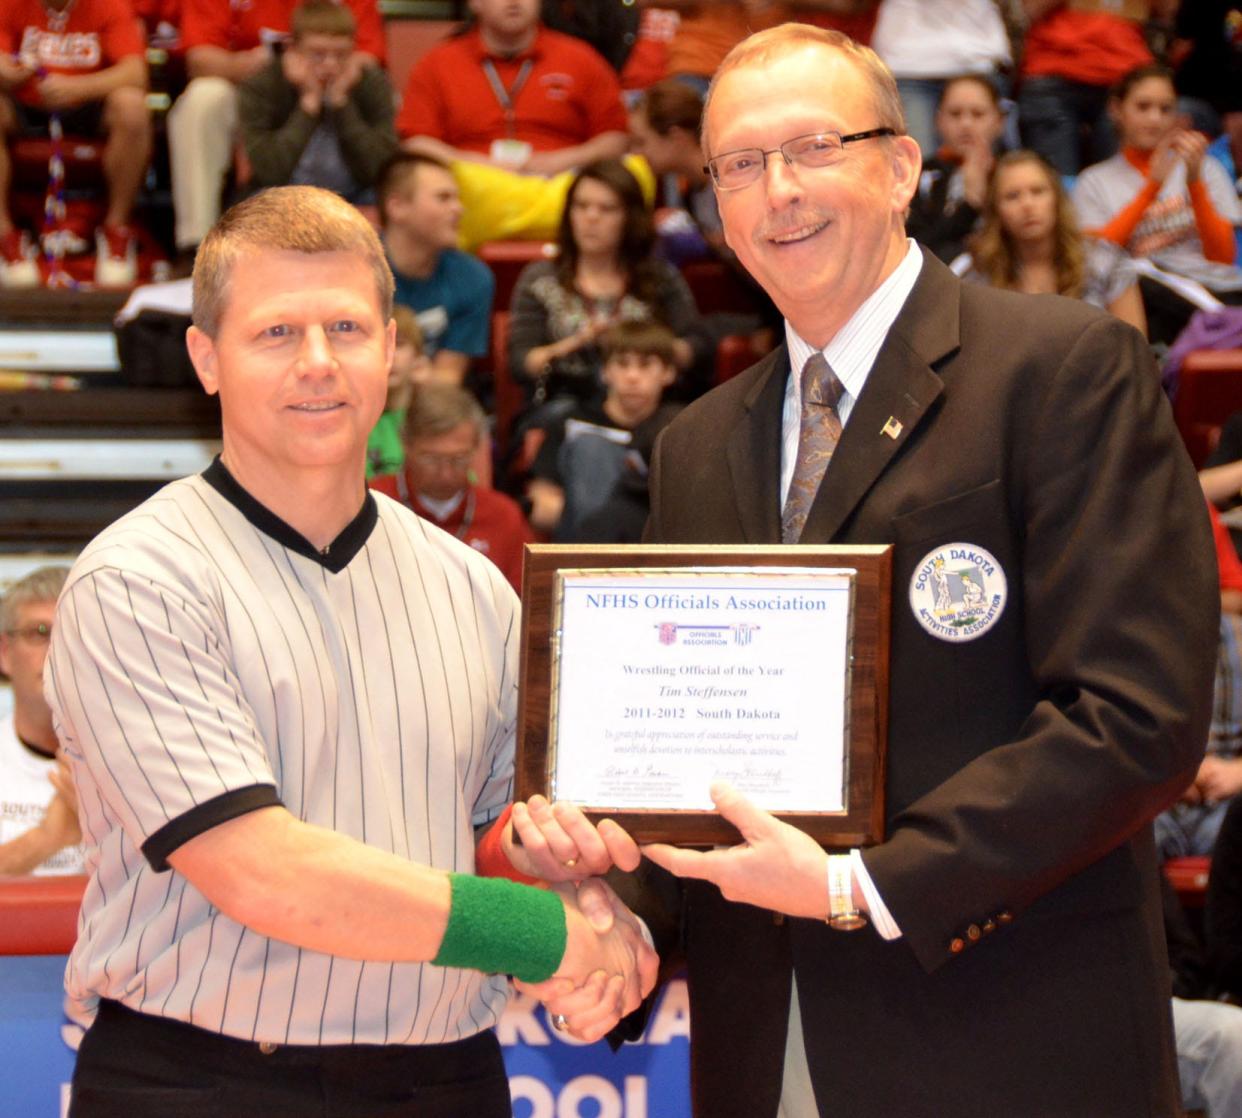 Tim Steffensen of Watertown is shown receiving the National Federation of High Schools Wrestling Official of the Year Award from Wayne Carney in 2011-12. Steffensen is one of nine people set to be inducted into the South Dakota Wrestling Coaches Associations Hall of Fame on Saturday, Feb. 24 during the State Individual Wrestling Championships at Sioux Falls.